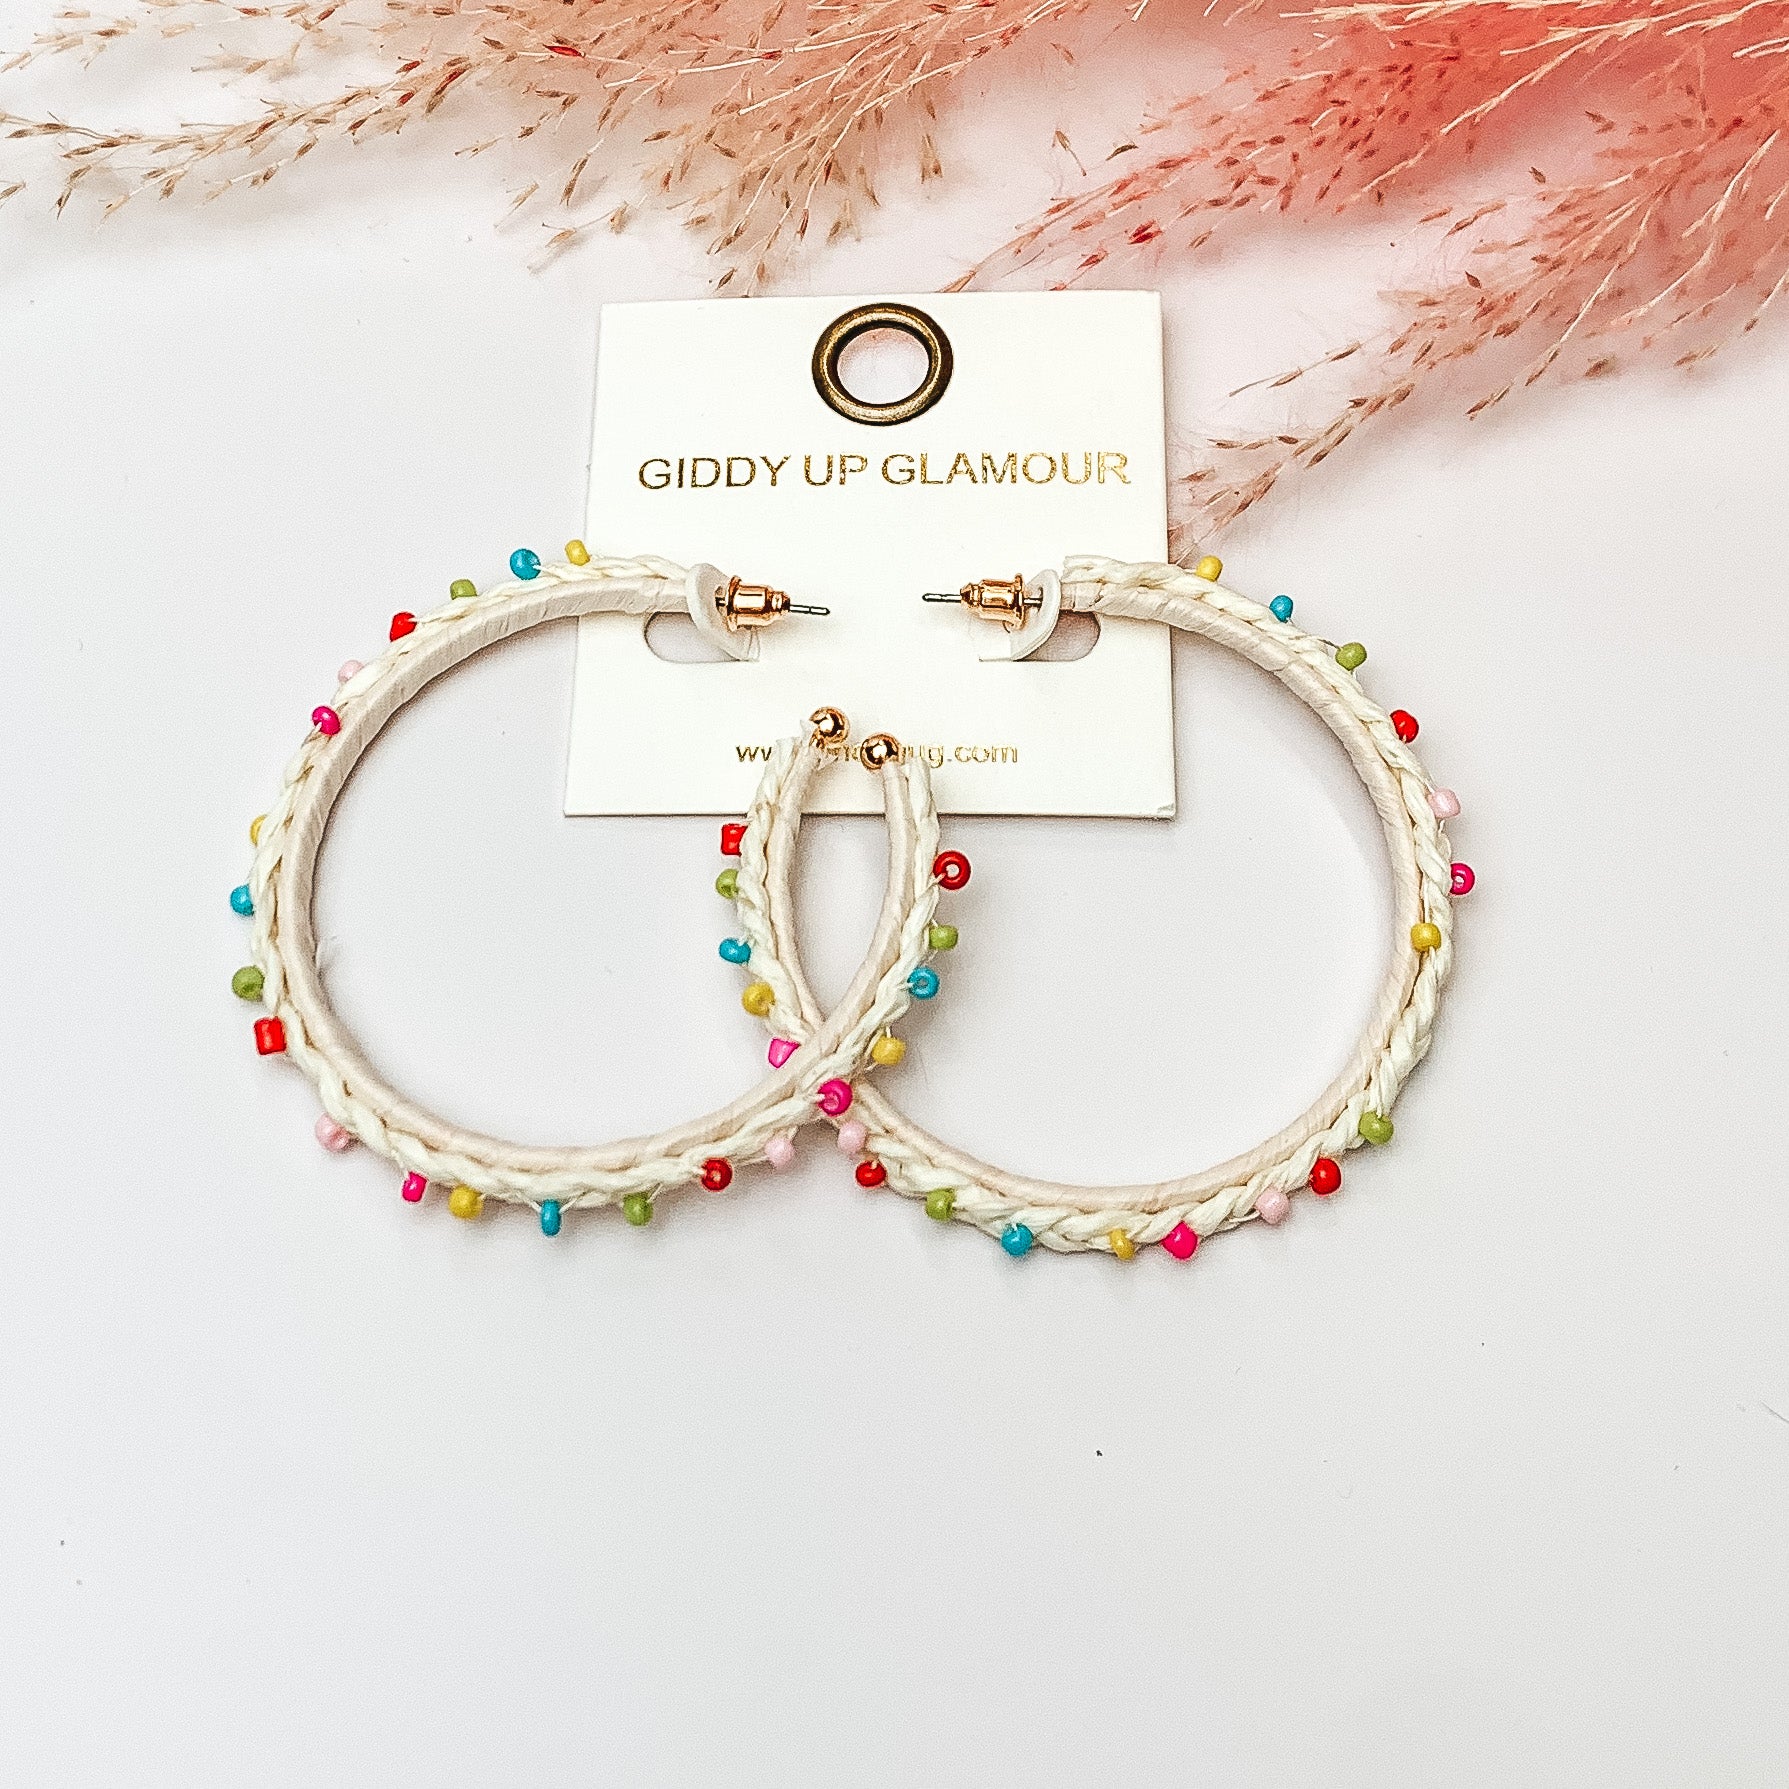 Pictured are raffia braided hoop earrings in ivory with colorful beads. They are pictured with a pink feather on a white background.